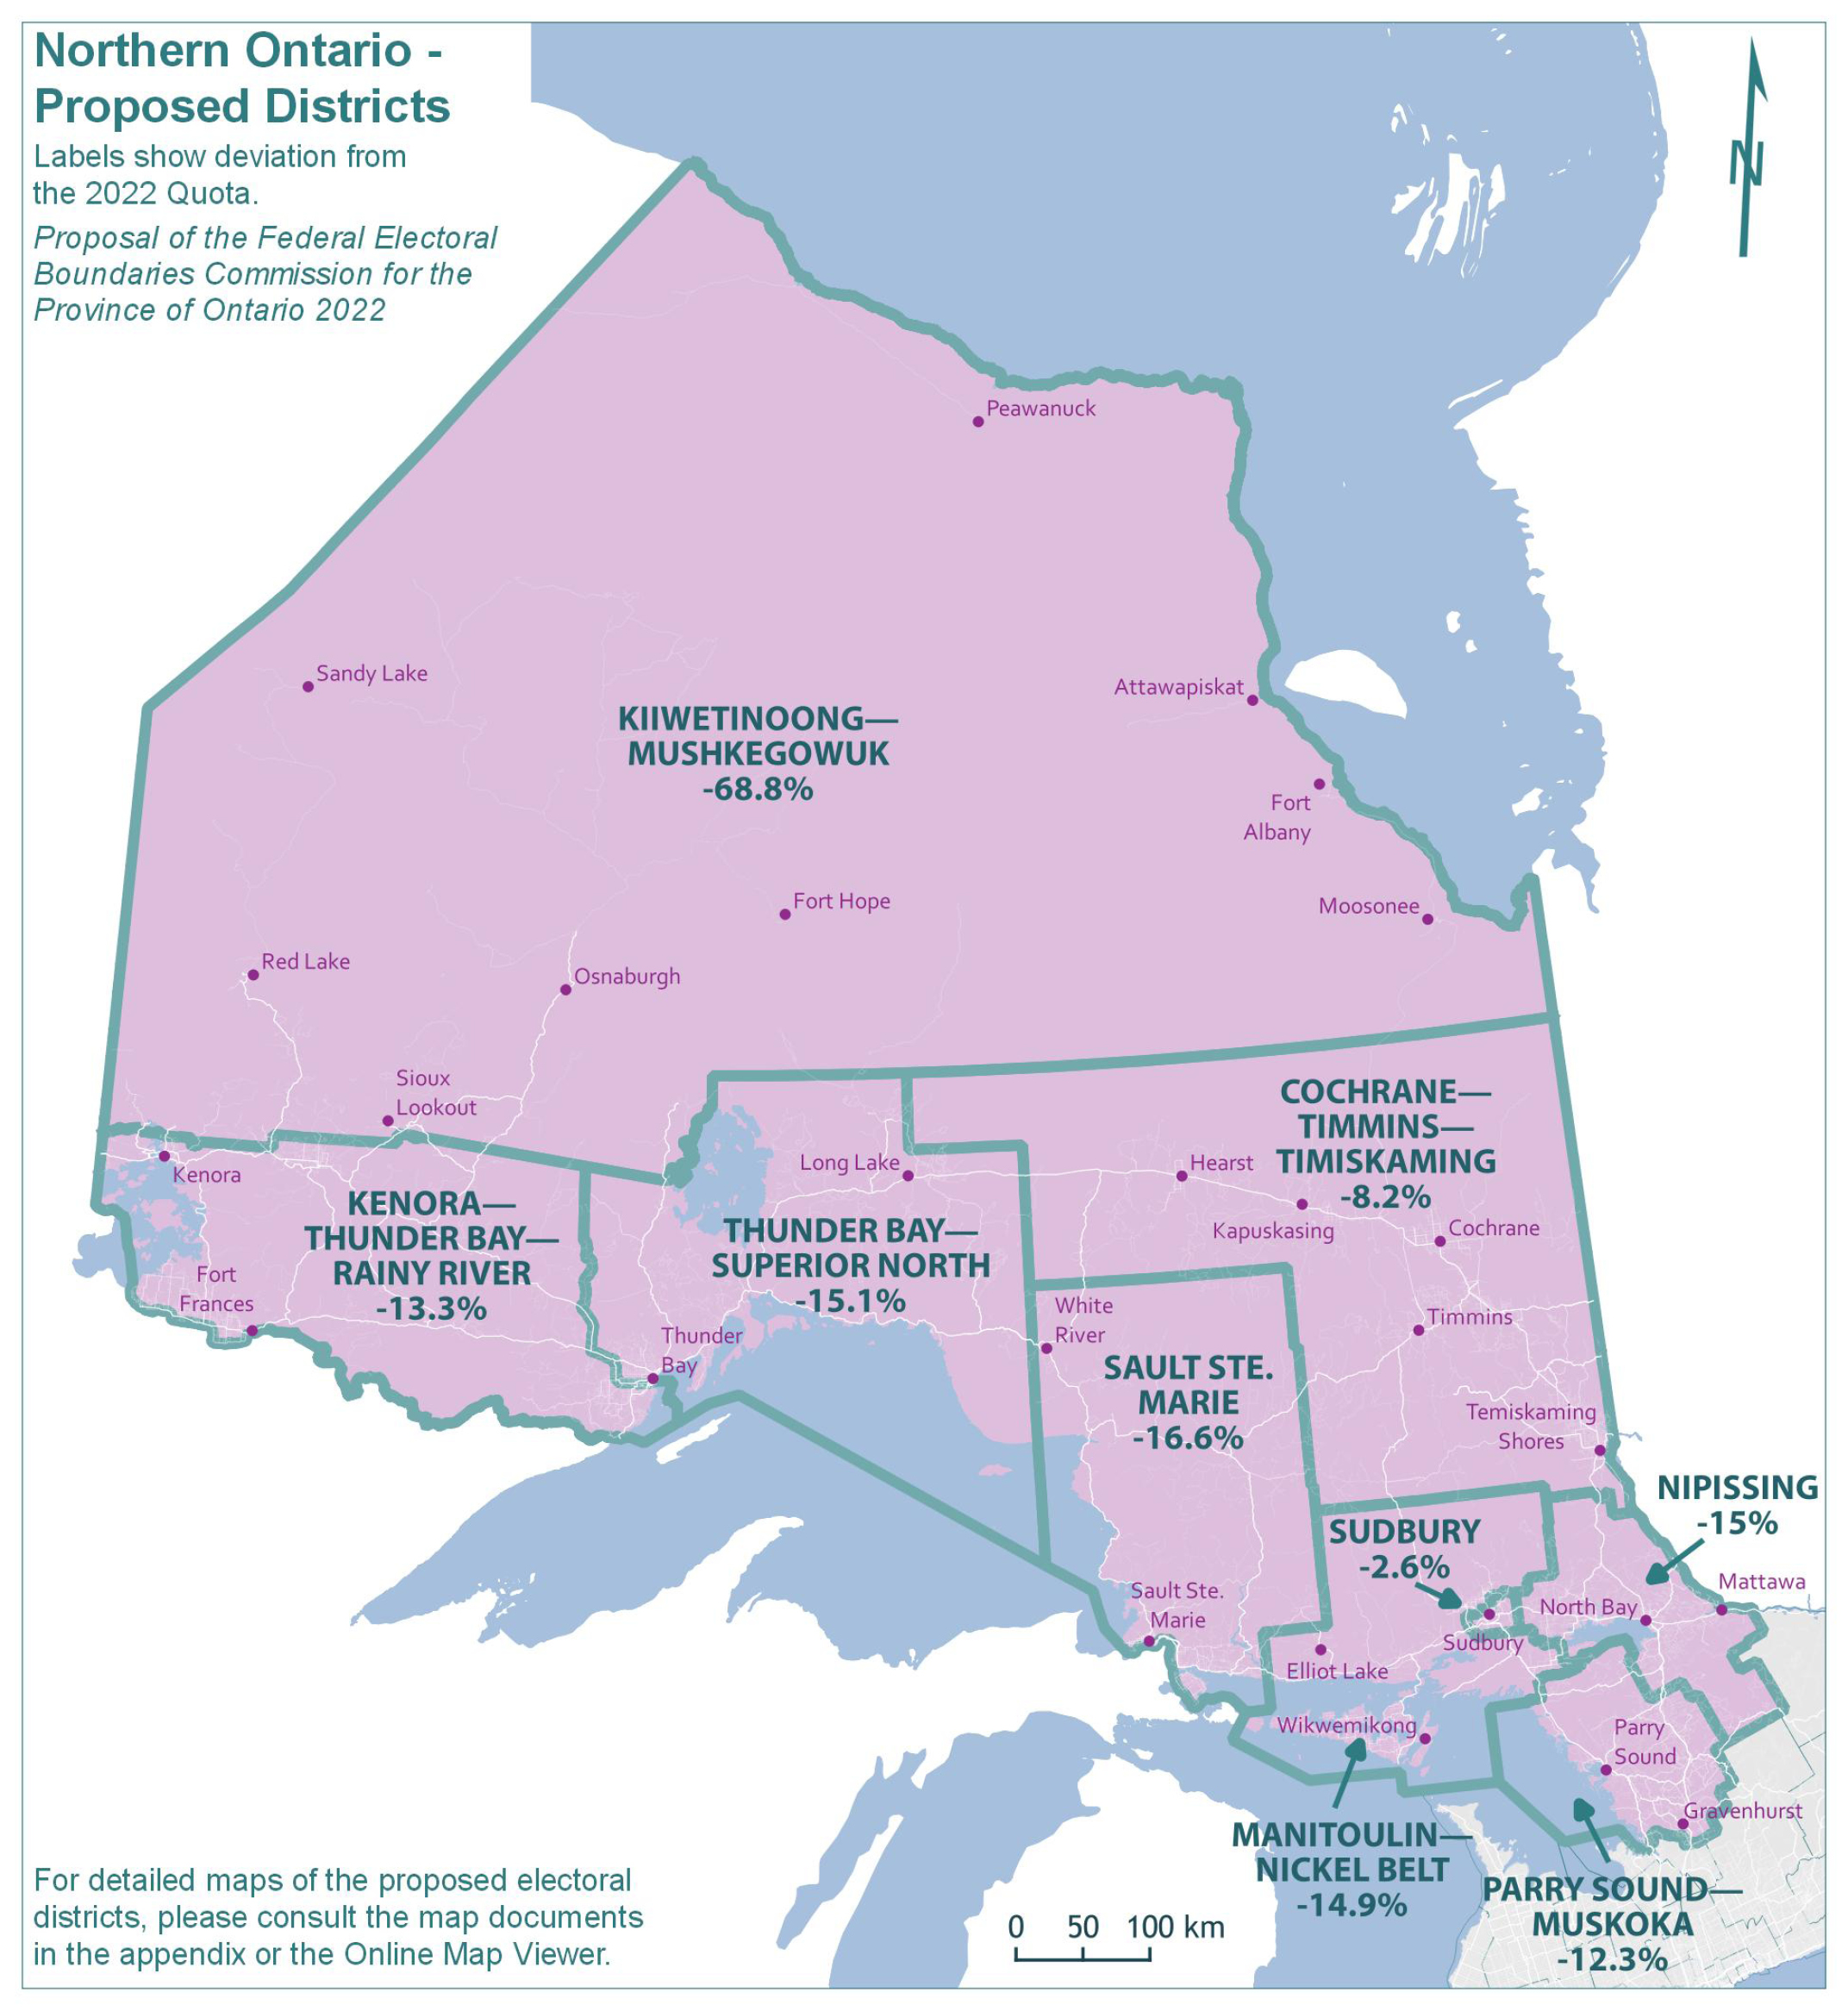 Northern Ontario - Proposed Districts